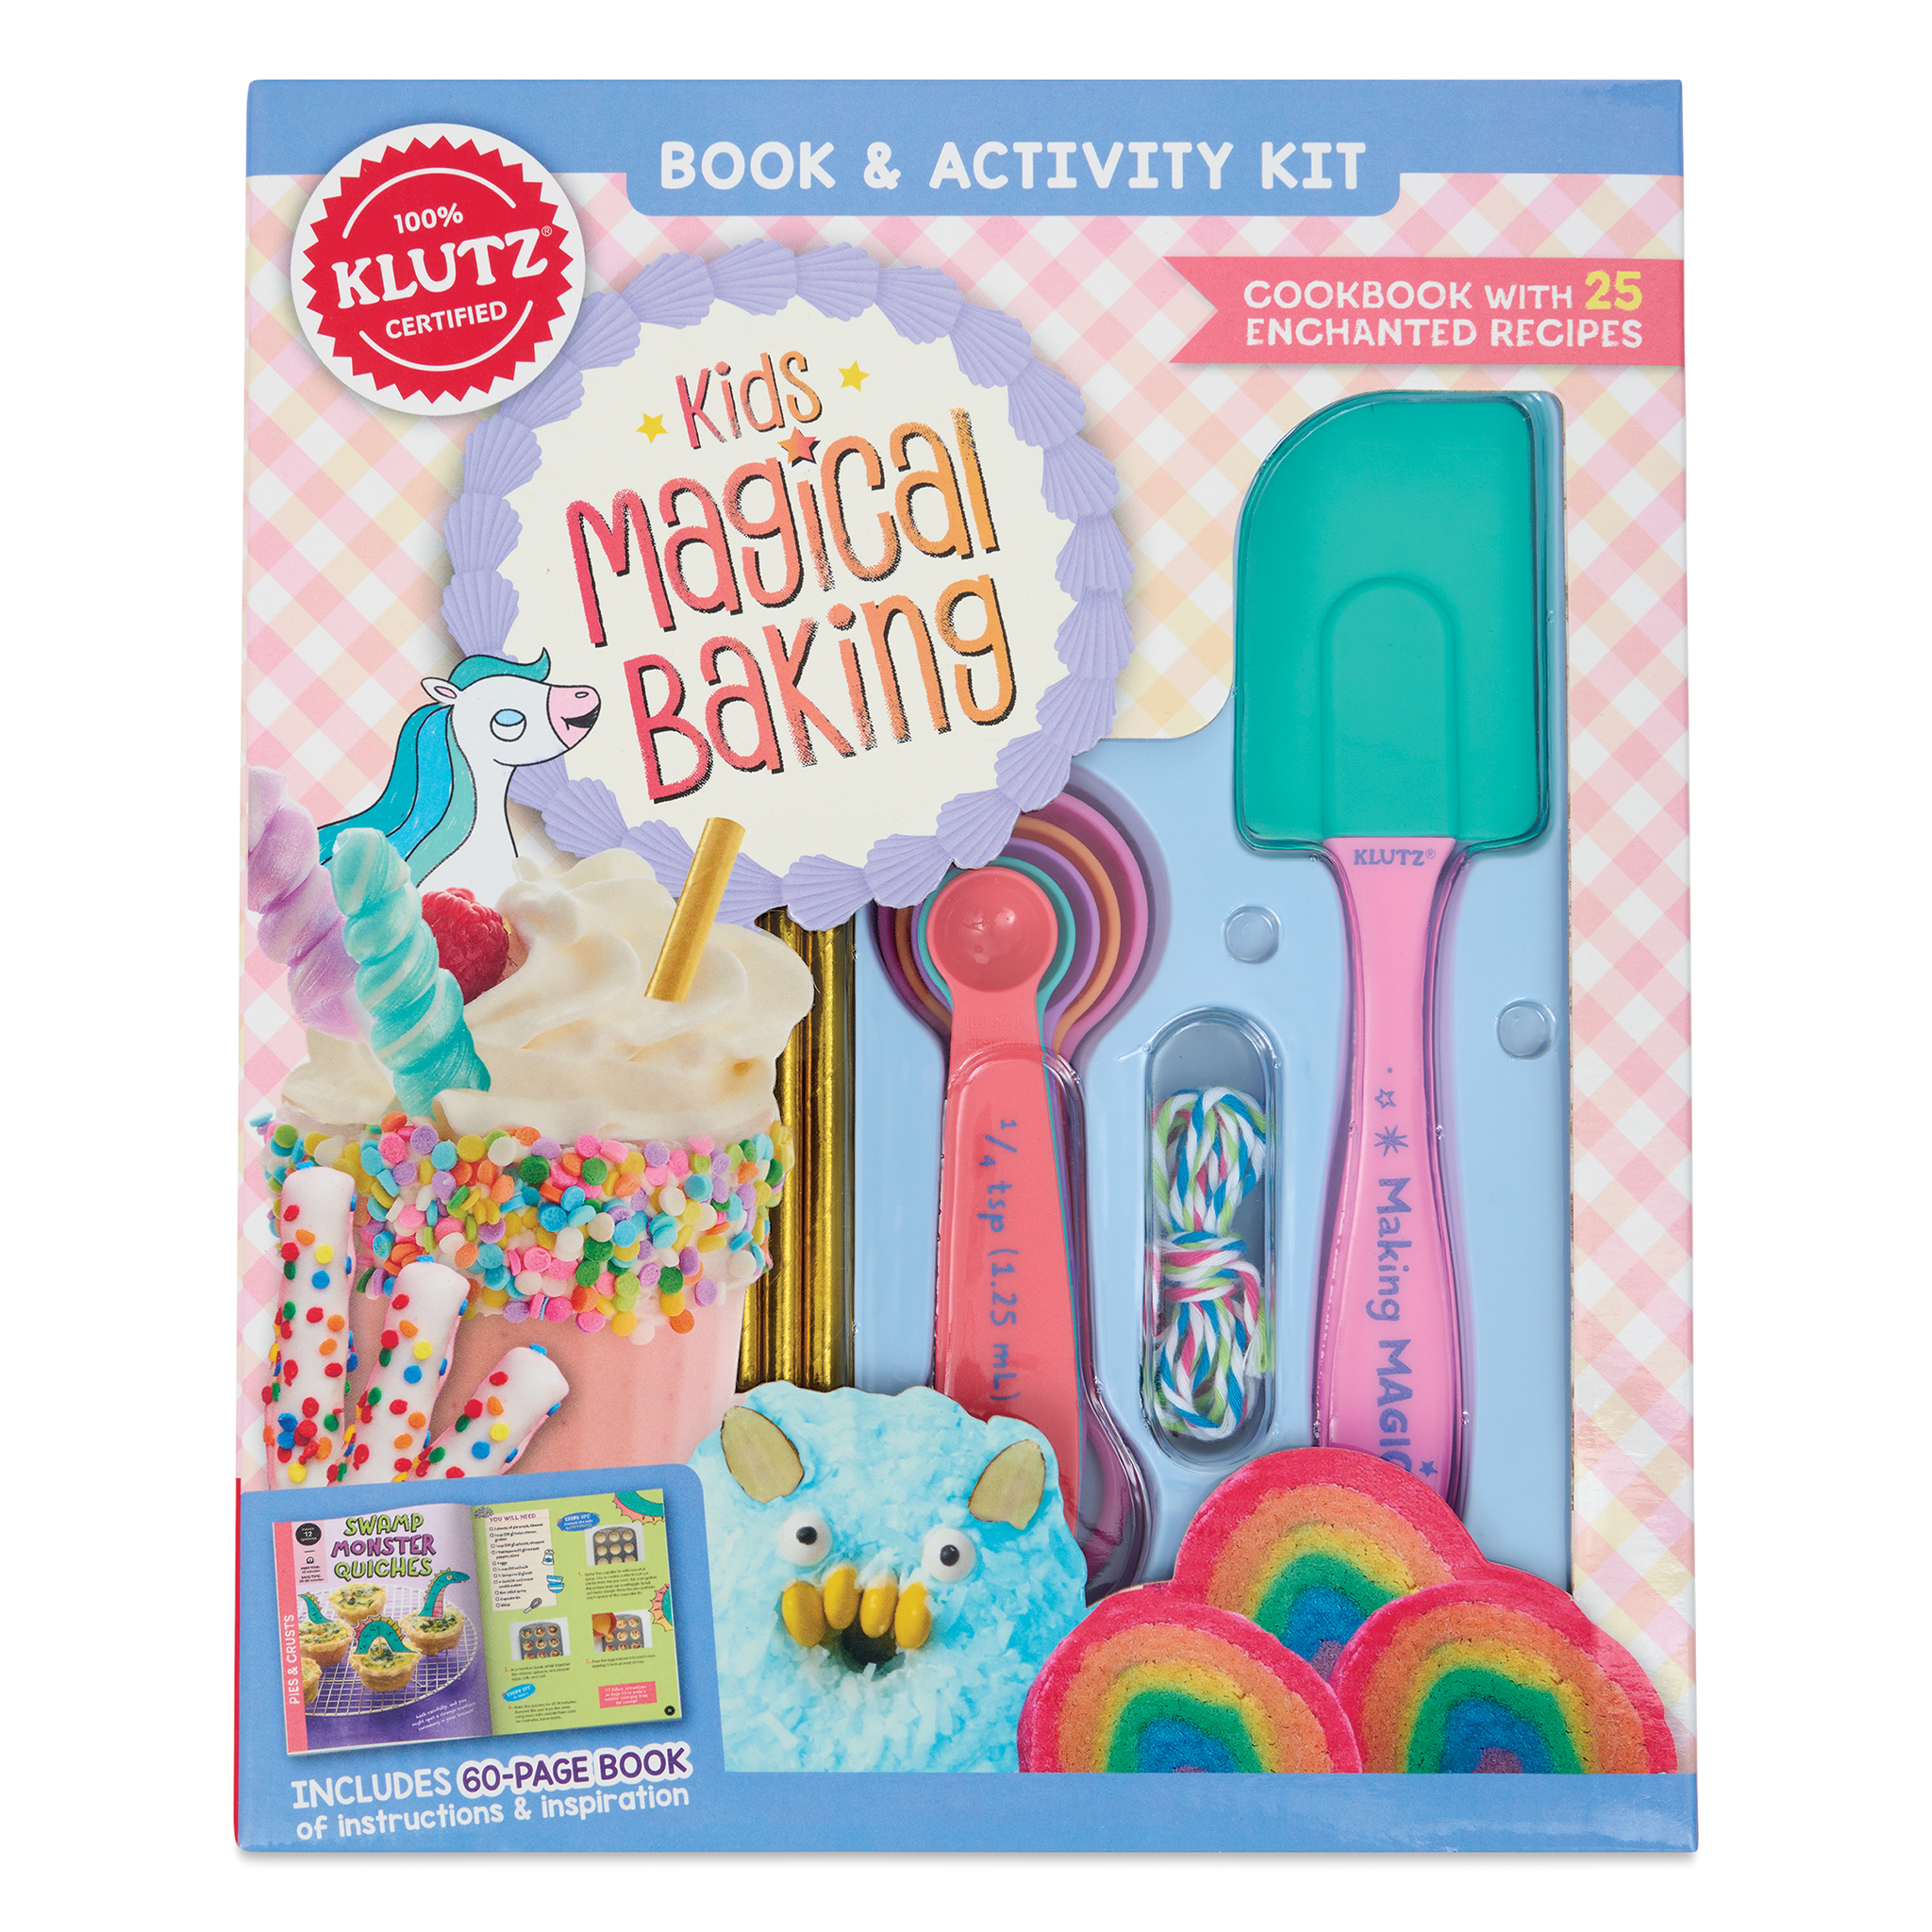 Kids Magical Baking by KLutz - Kidstop toys and books